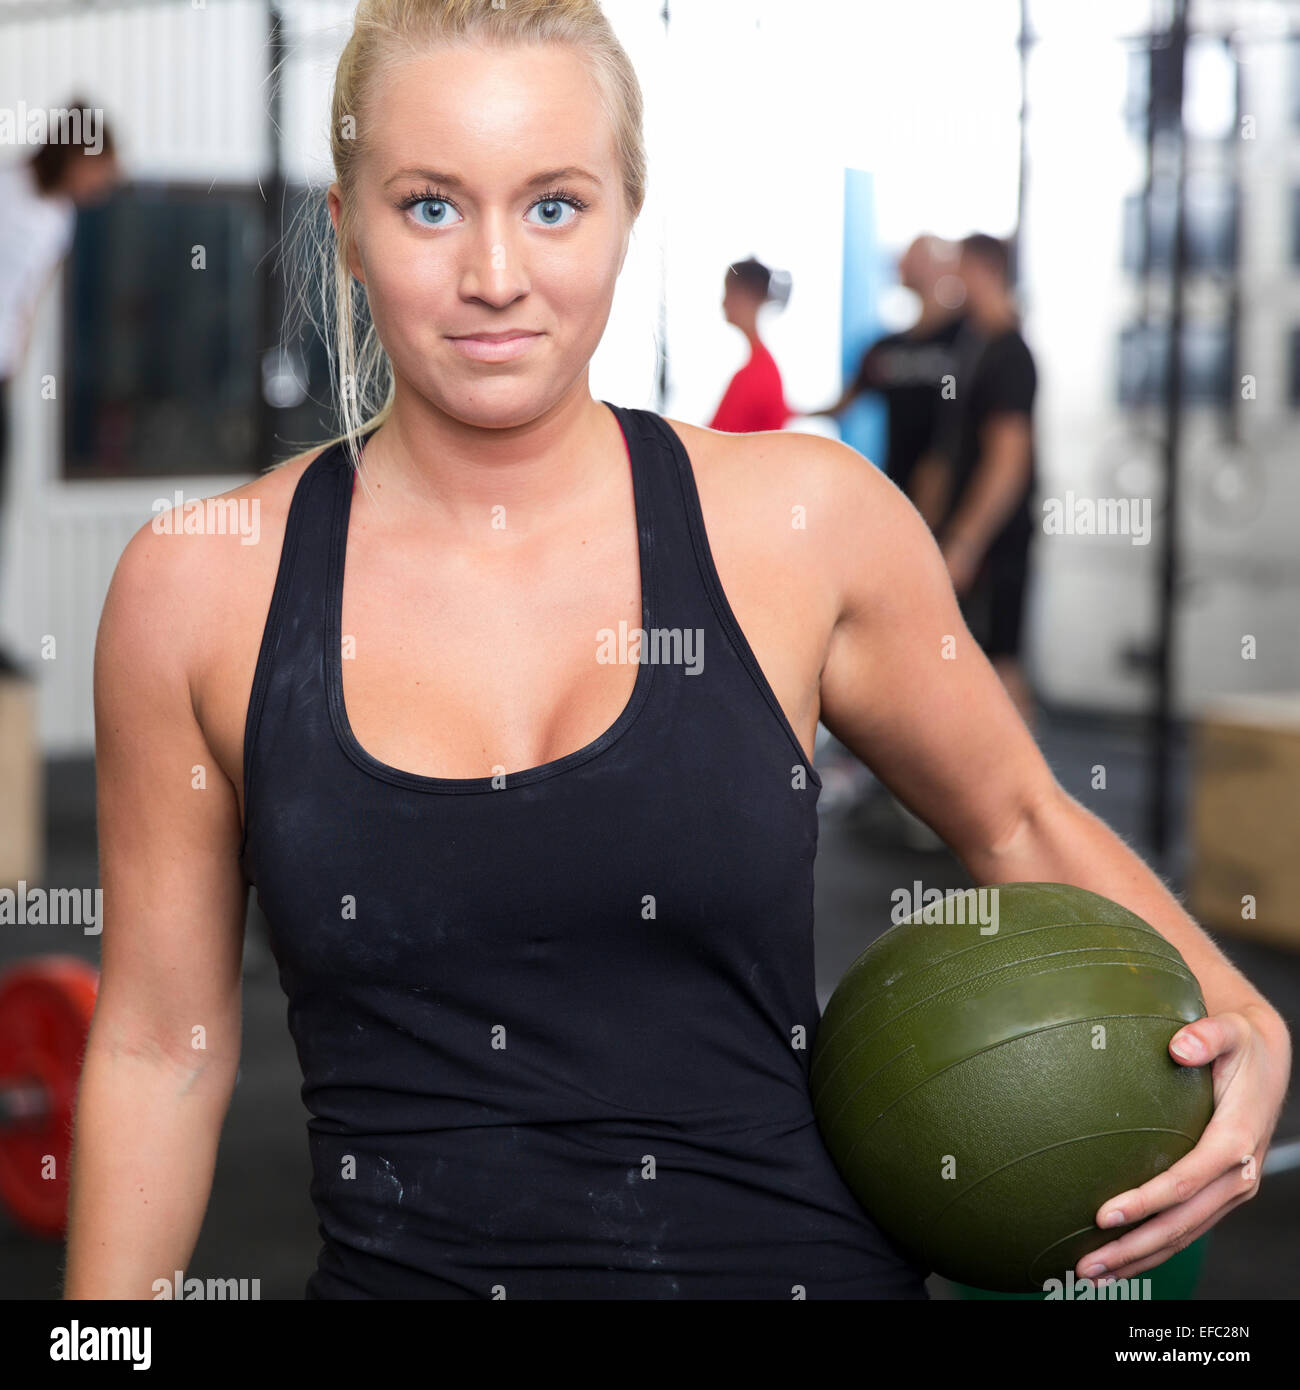 Smiling young woman with slam ball at gym center Stock Photo